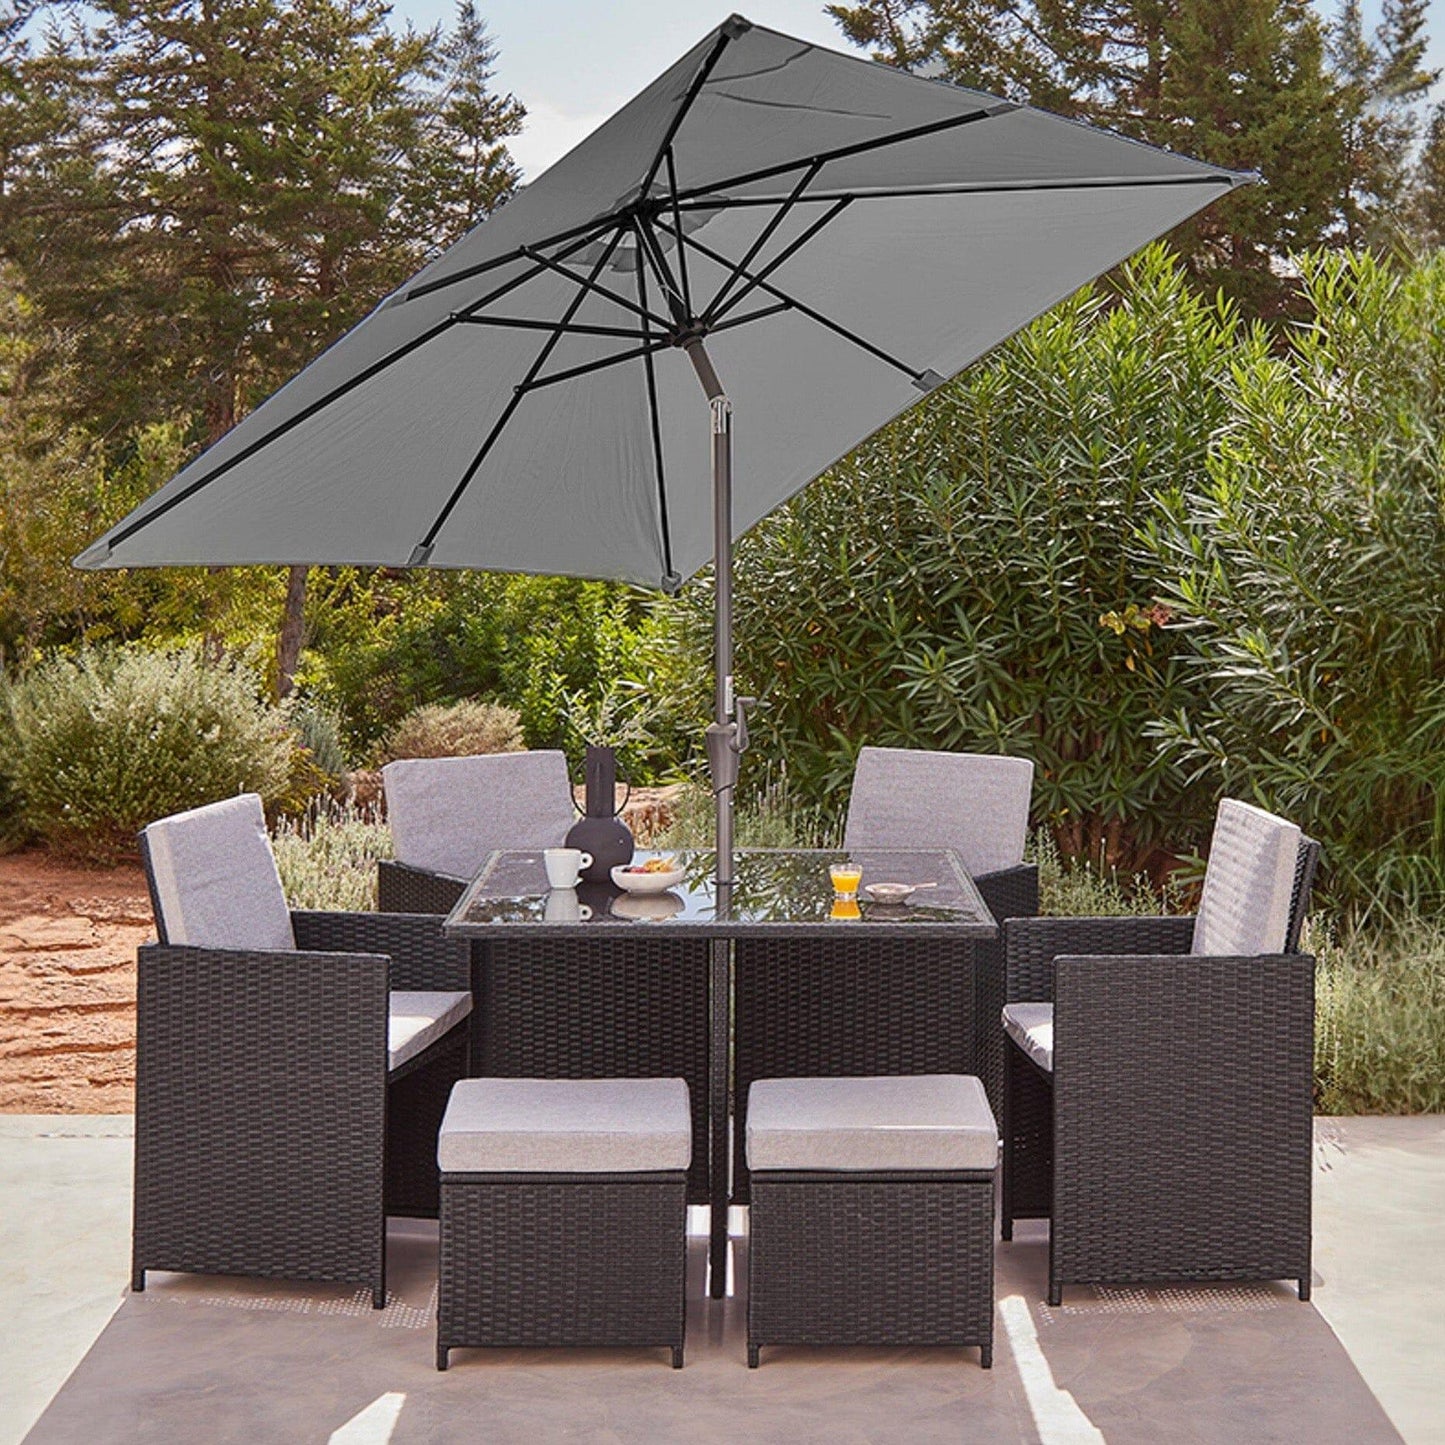 8 Seater Rattan Cube Outdoor Dining Set with Parasol - Black Weave